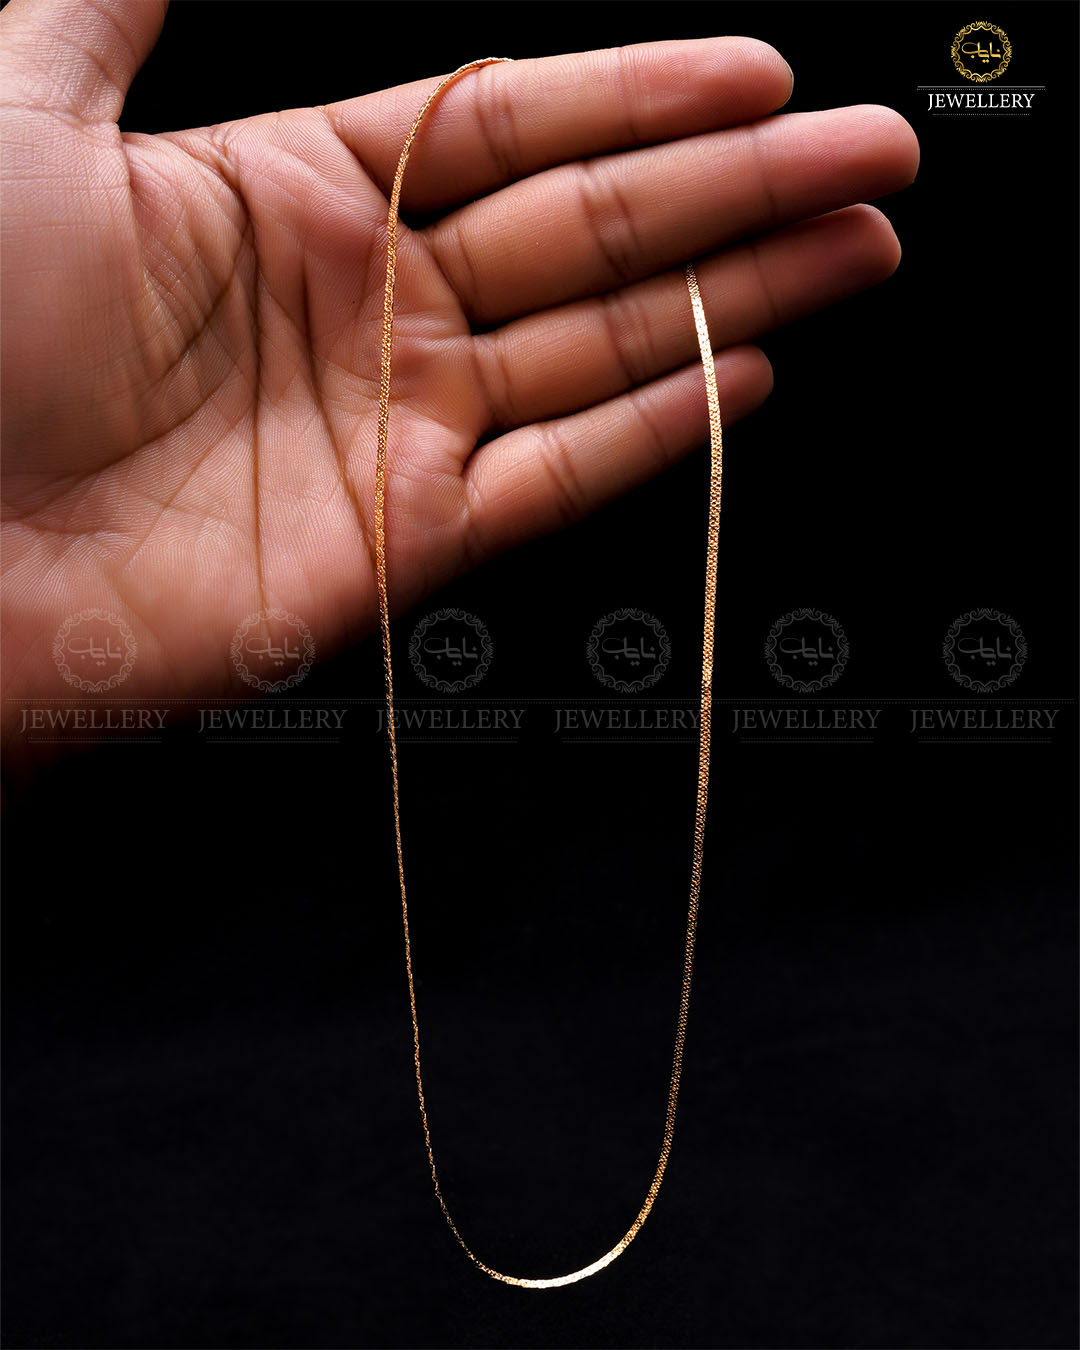 Premium Quality Chain 17 inches (sigle side)-1980